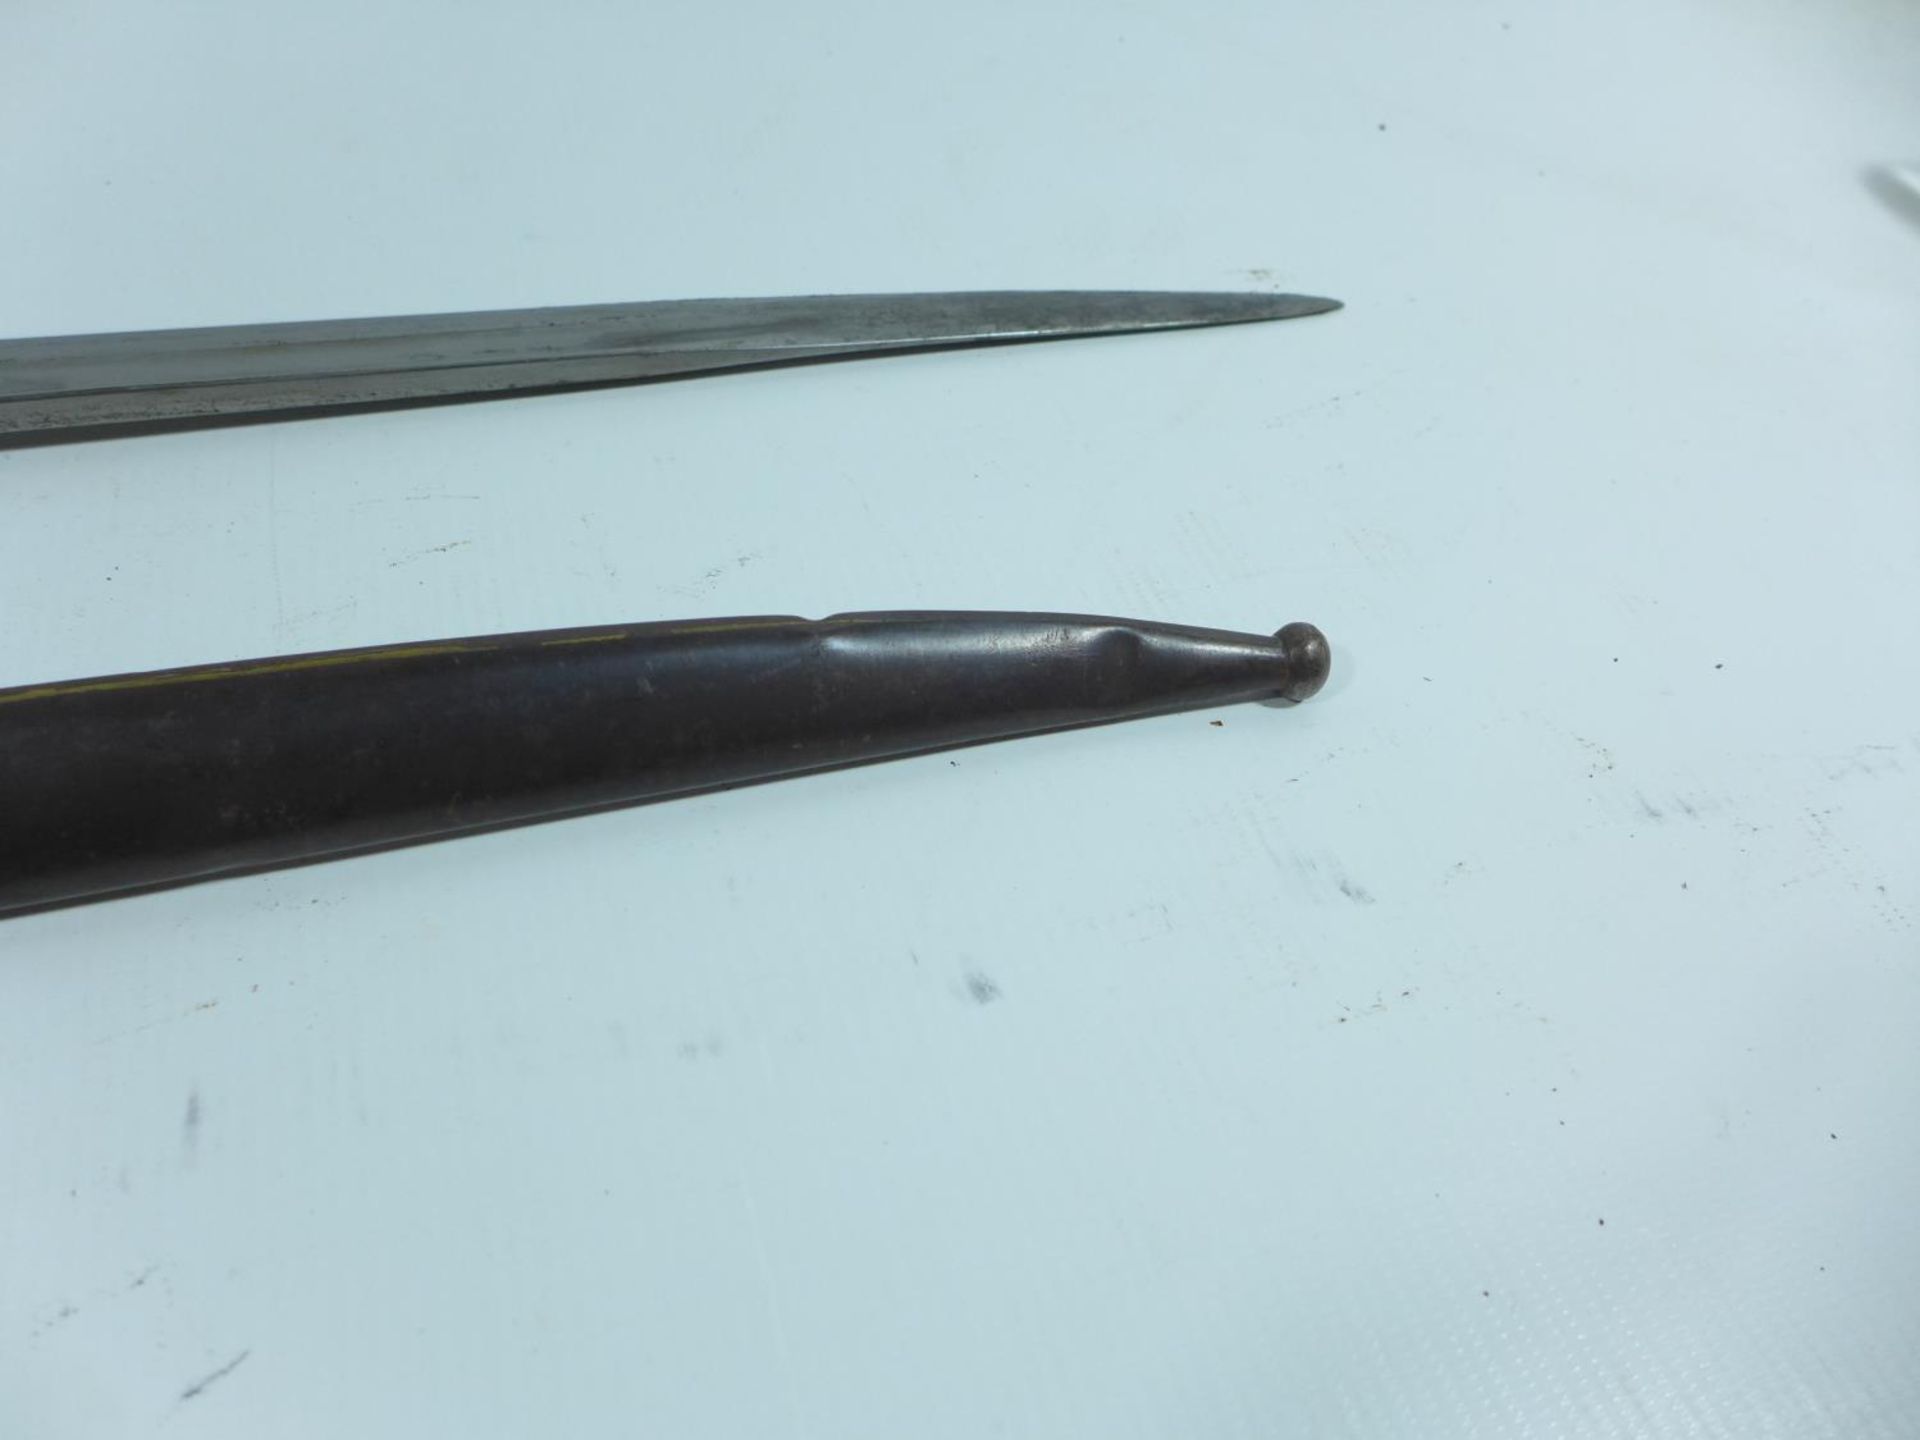 A PORTUGESE 1885 BAYONET AND SCABBARD, 47CM BLADE, LENGTH 61.5CM - Image 3 of 6